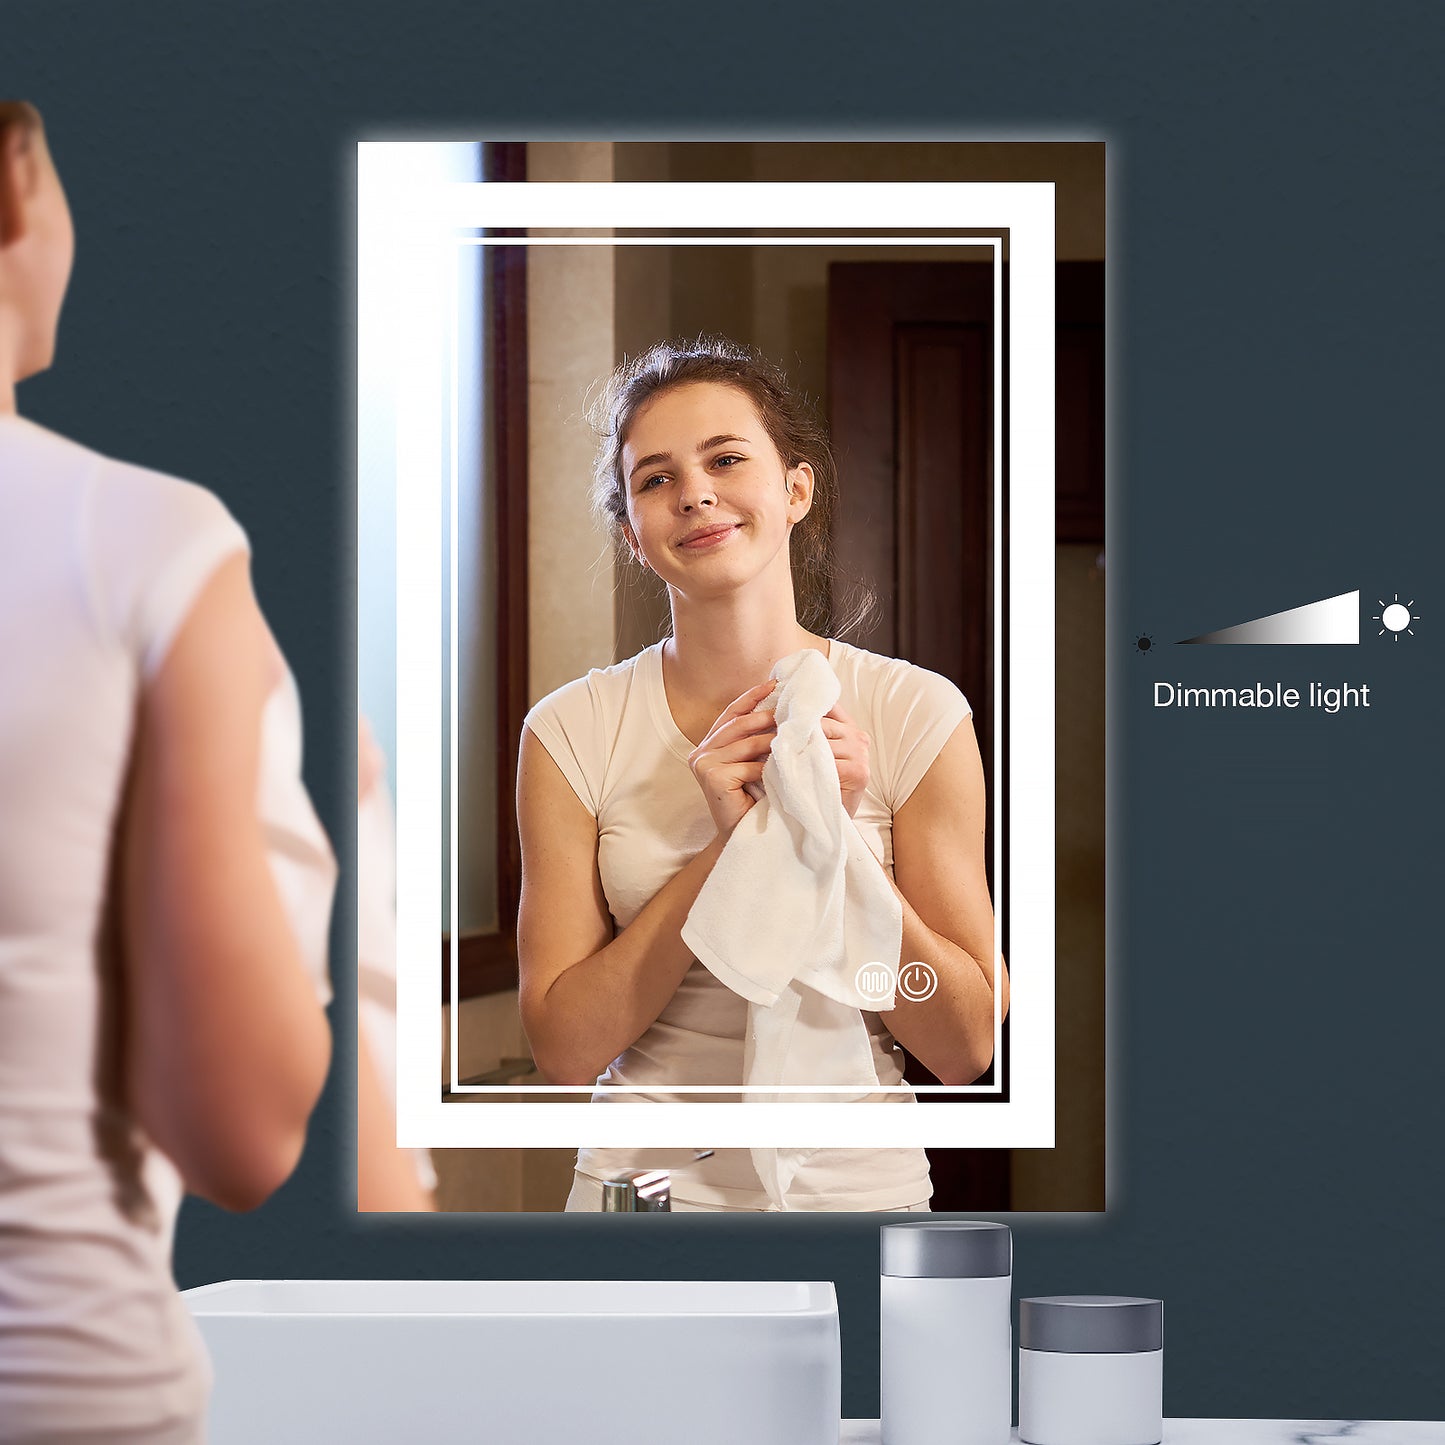 28x36 Inch Vanity Mirror With Lights With 3 Light Settings - Anti Fog Wall Mirror